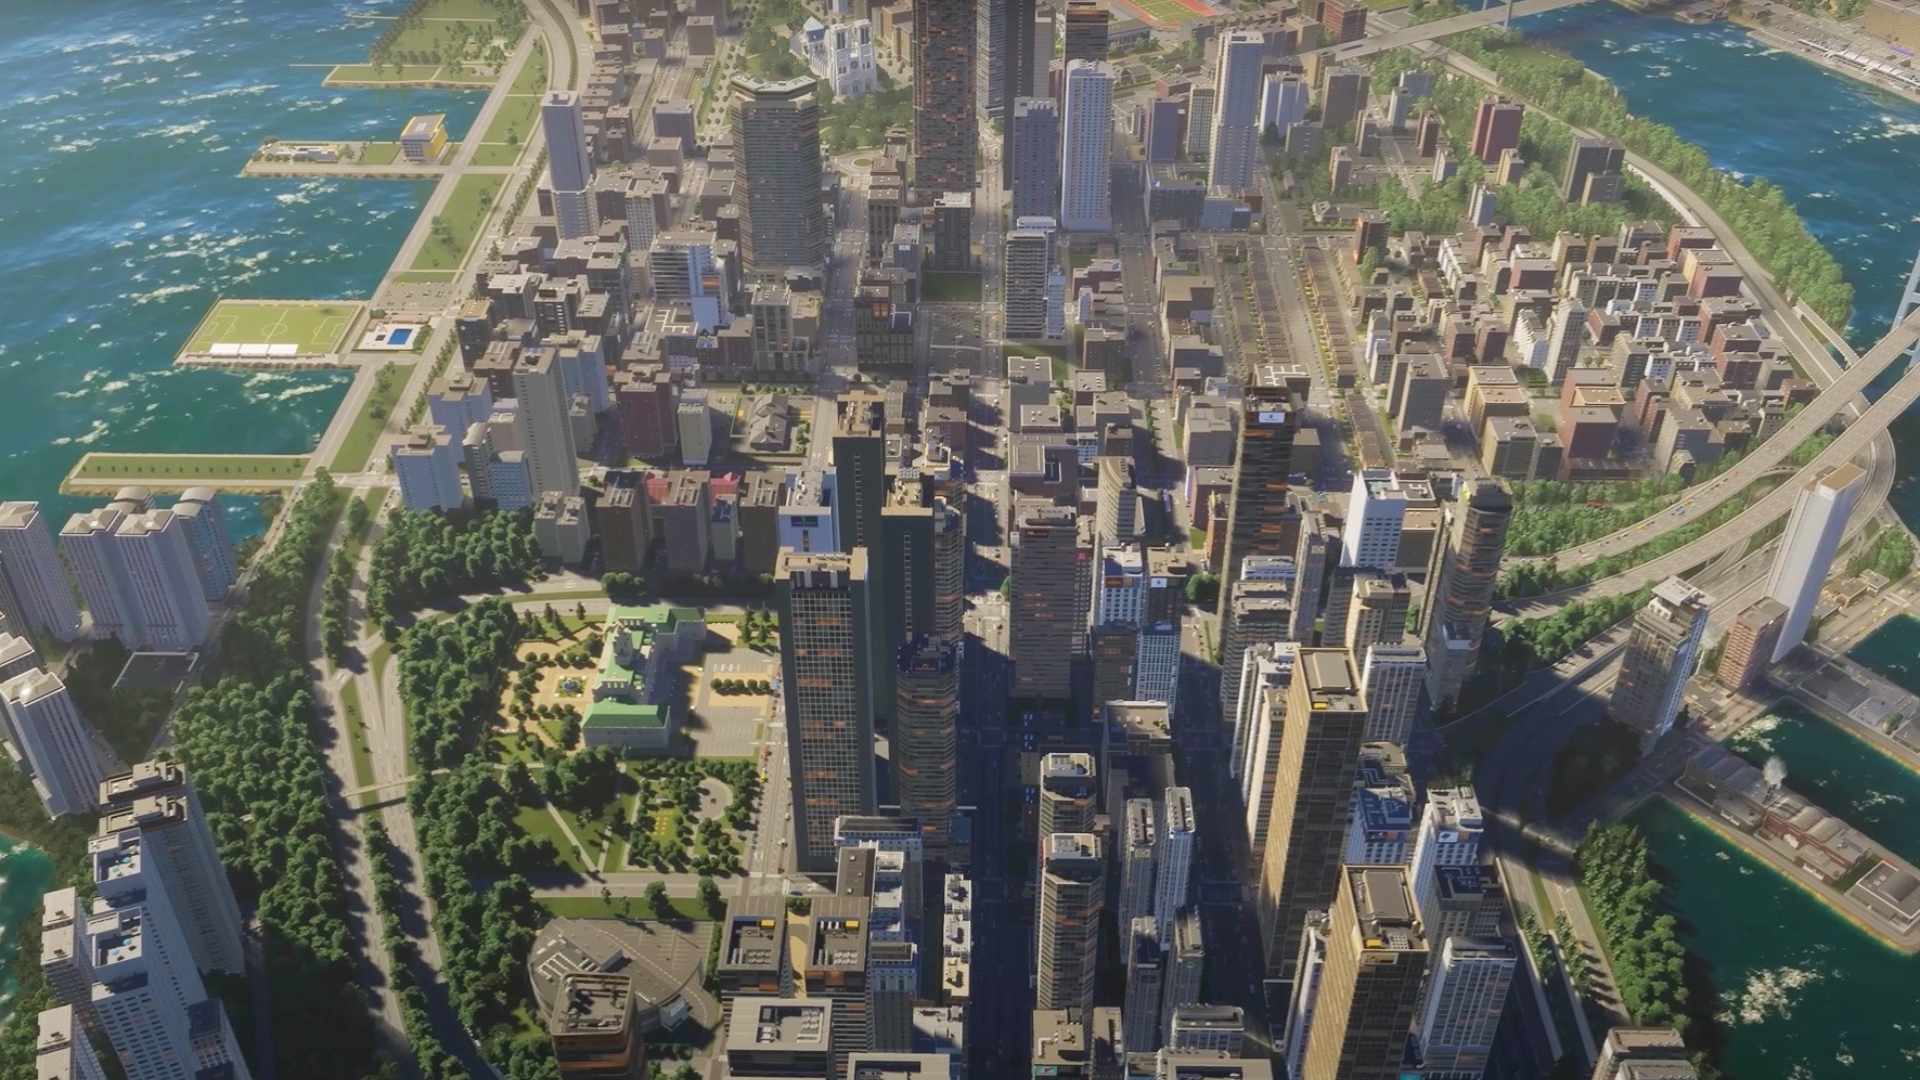 Cities Skylines 2 is so realistic it's actually making me scared | PCGamesN